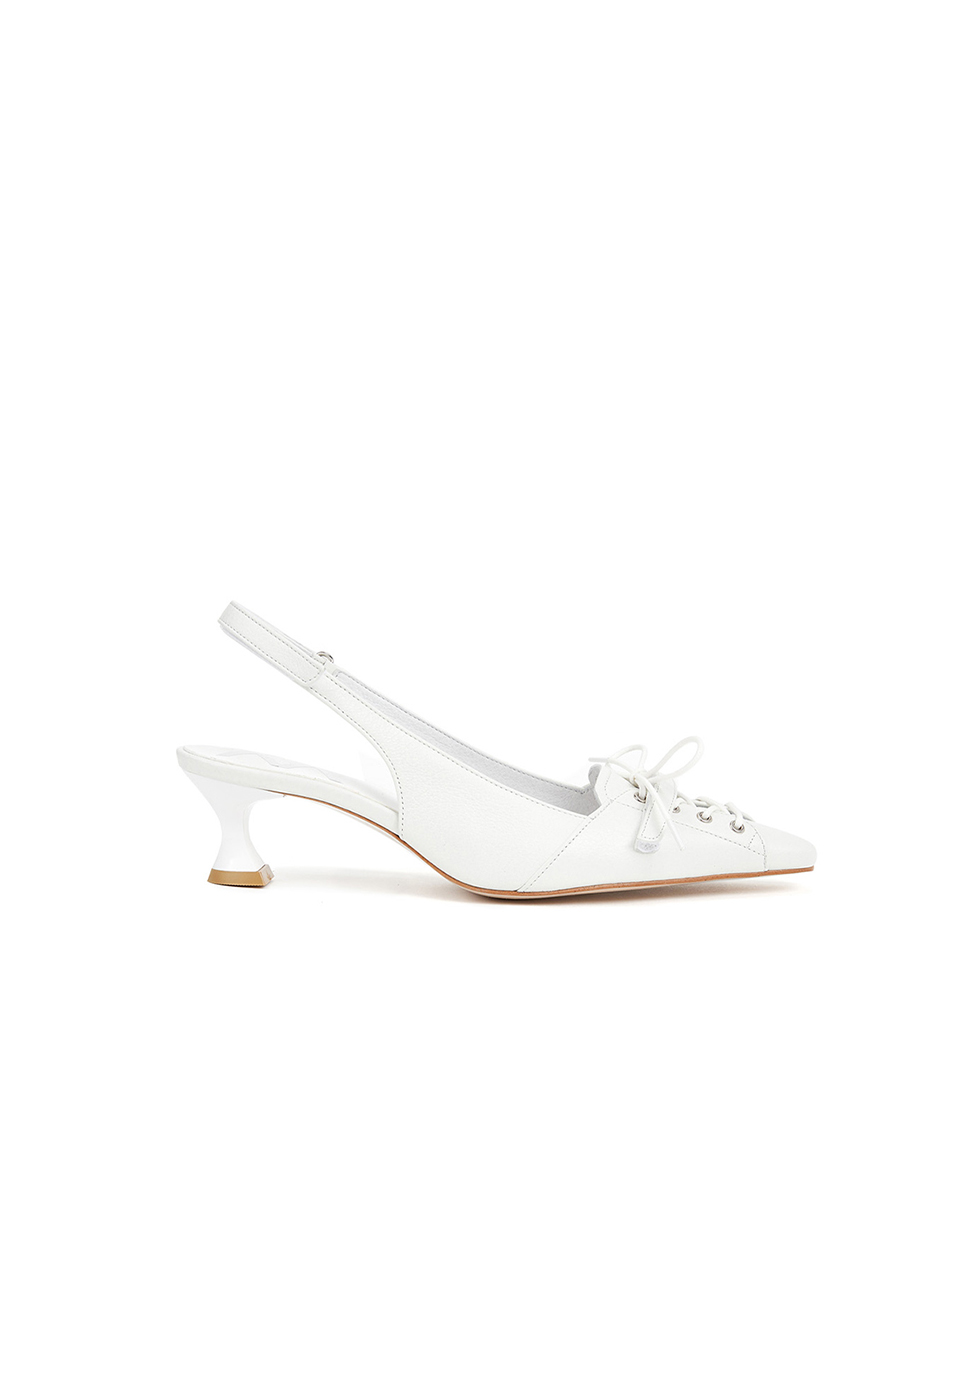 LACE-UP POINTY HEEL, WHITE